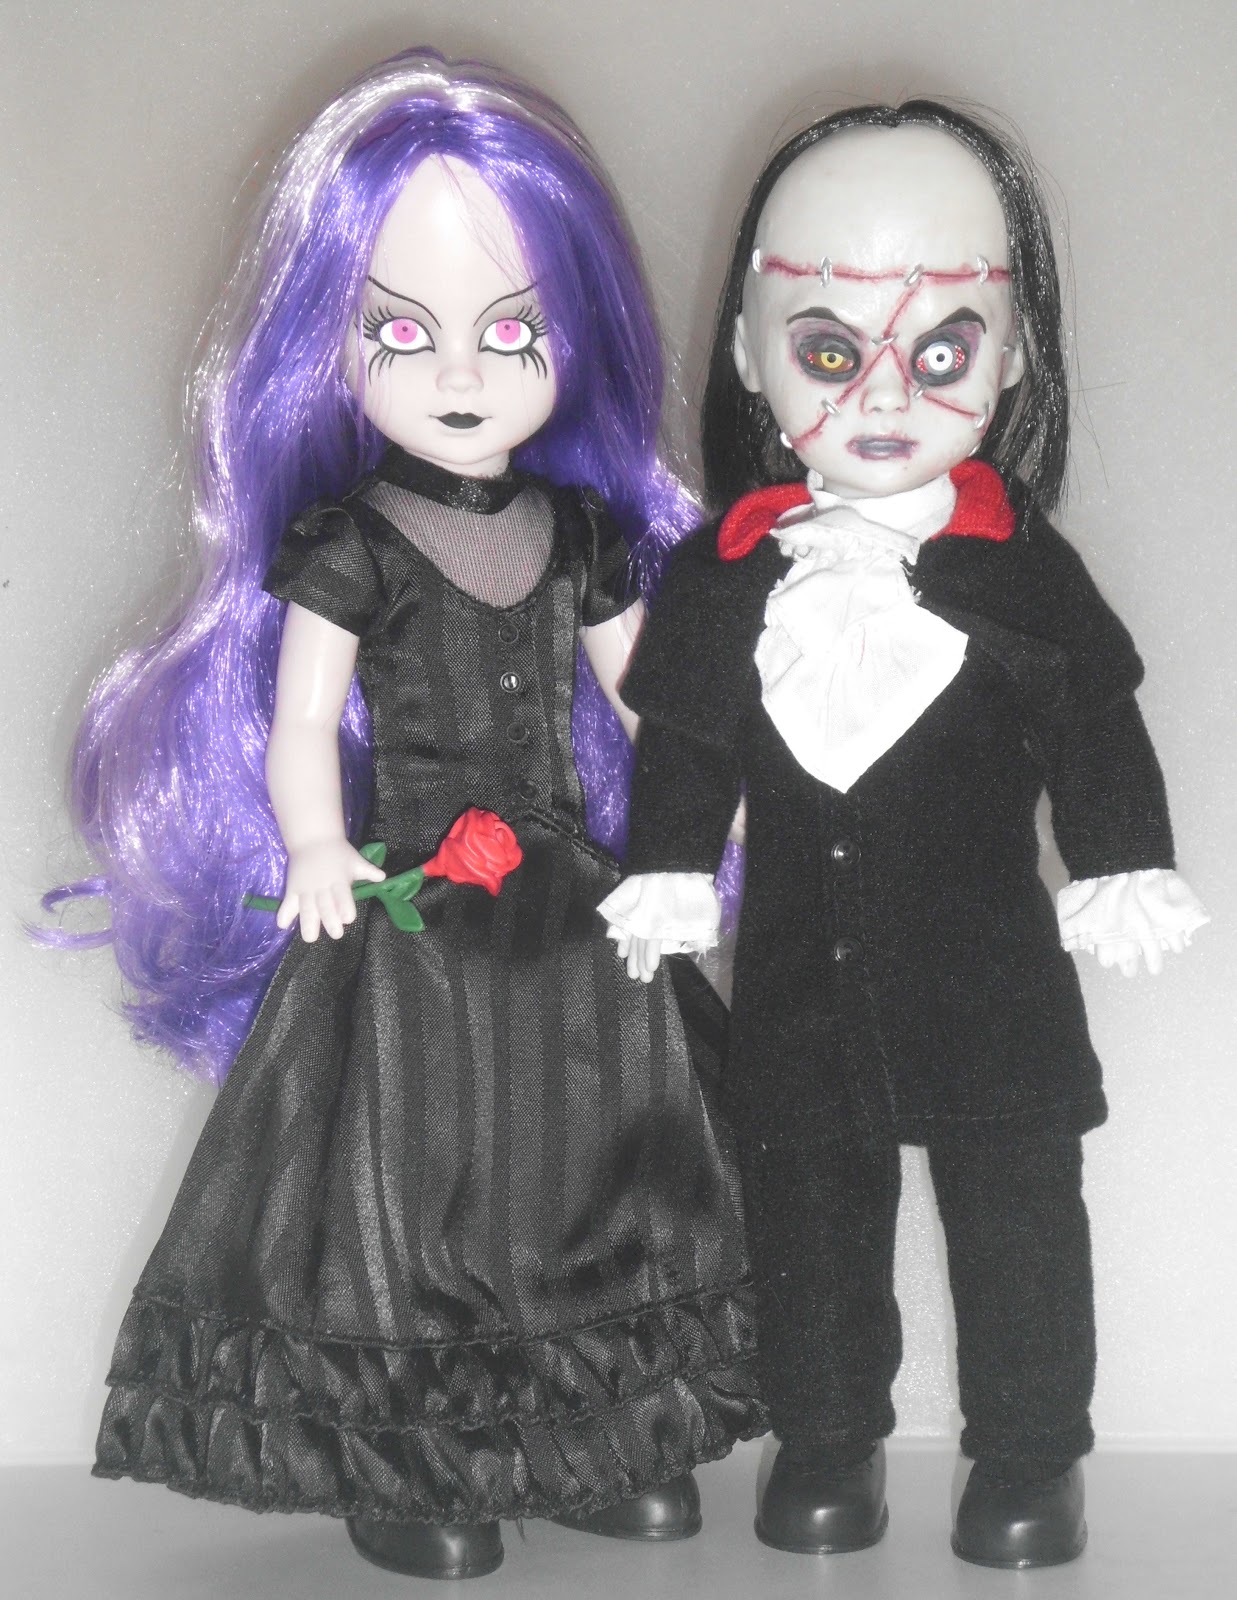 Confessions of a Dolly Lover: My first Living Dead Dolls!